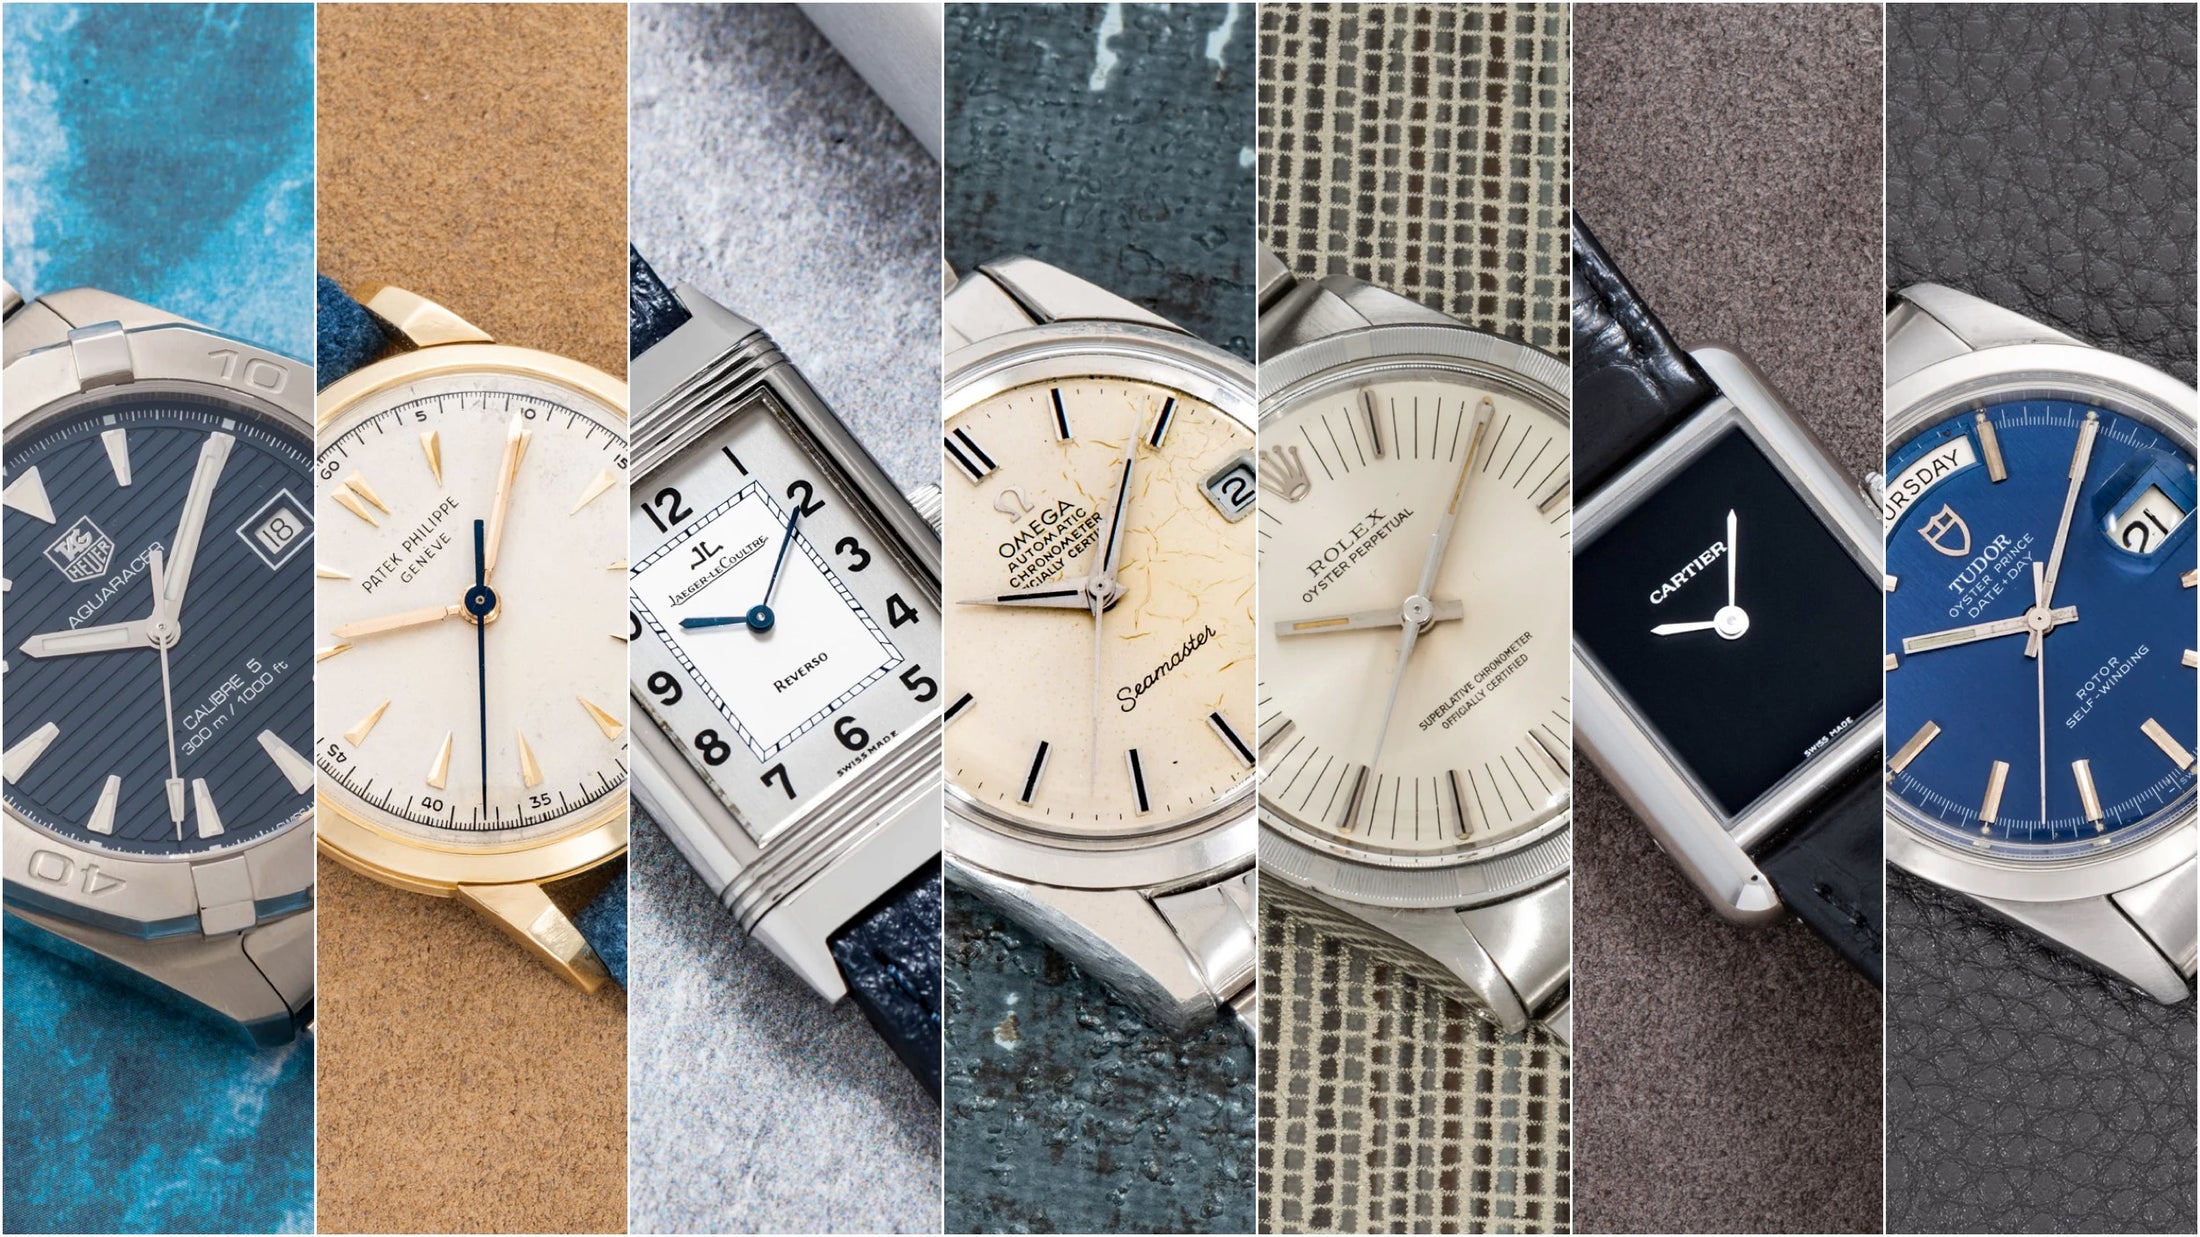 Entry-Level Pre-Owned Watches from Prominent Brands